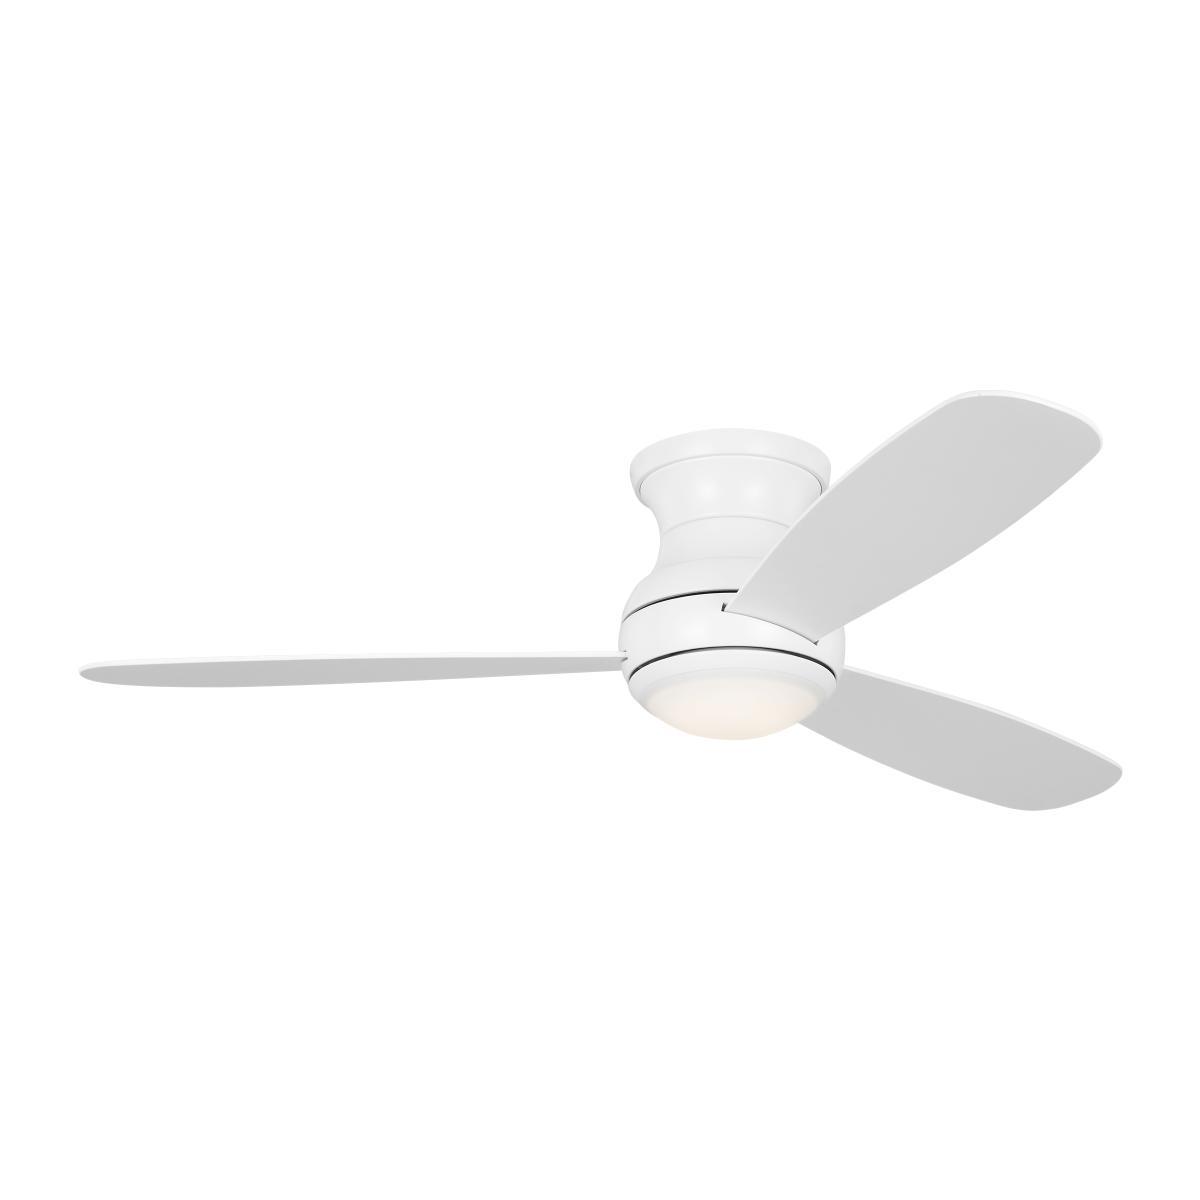 Orbis 52 Inch Hugger LED Ceiling Fan With Wall Control, Matte White Finish - Bees Lighting